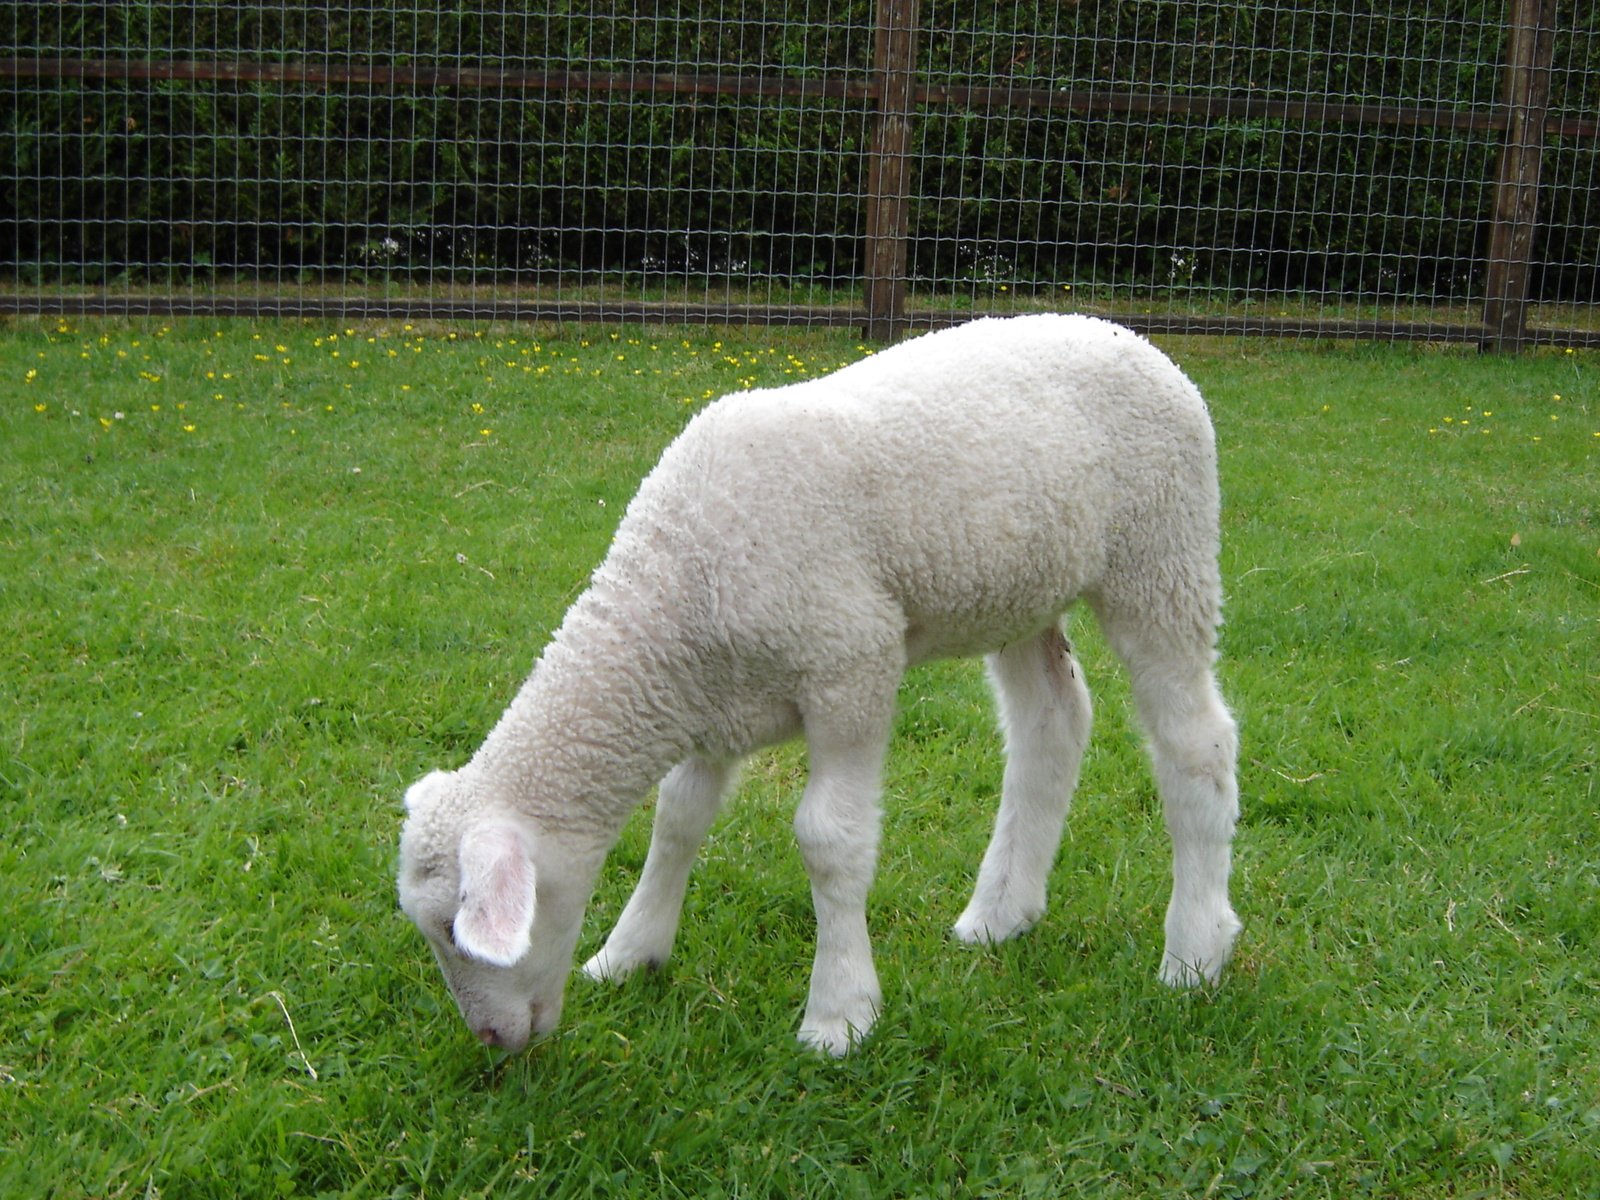 a white lamb eating some grass in a fenced pasture